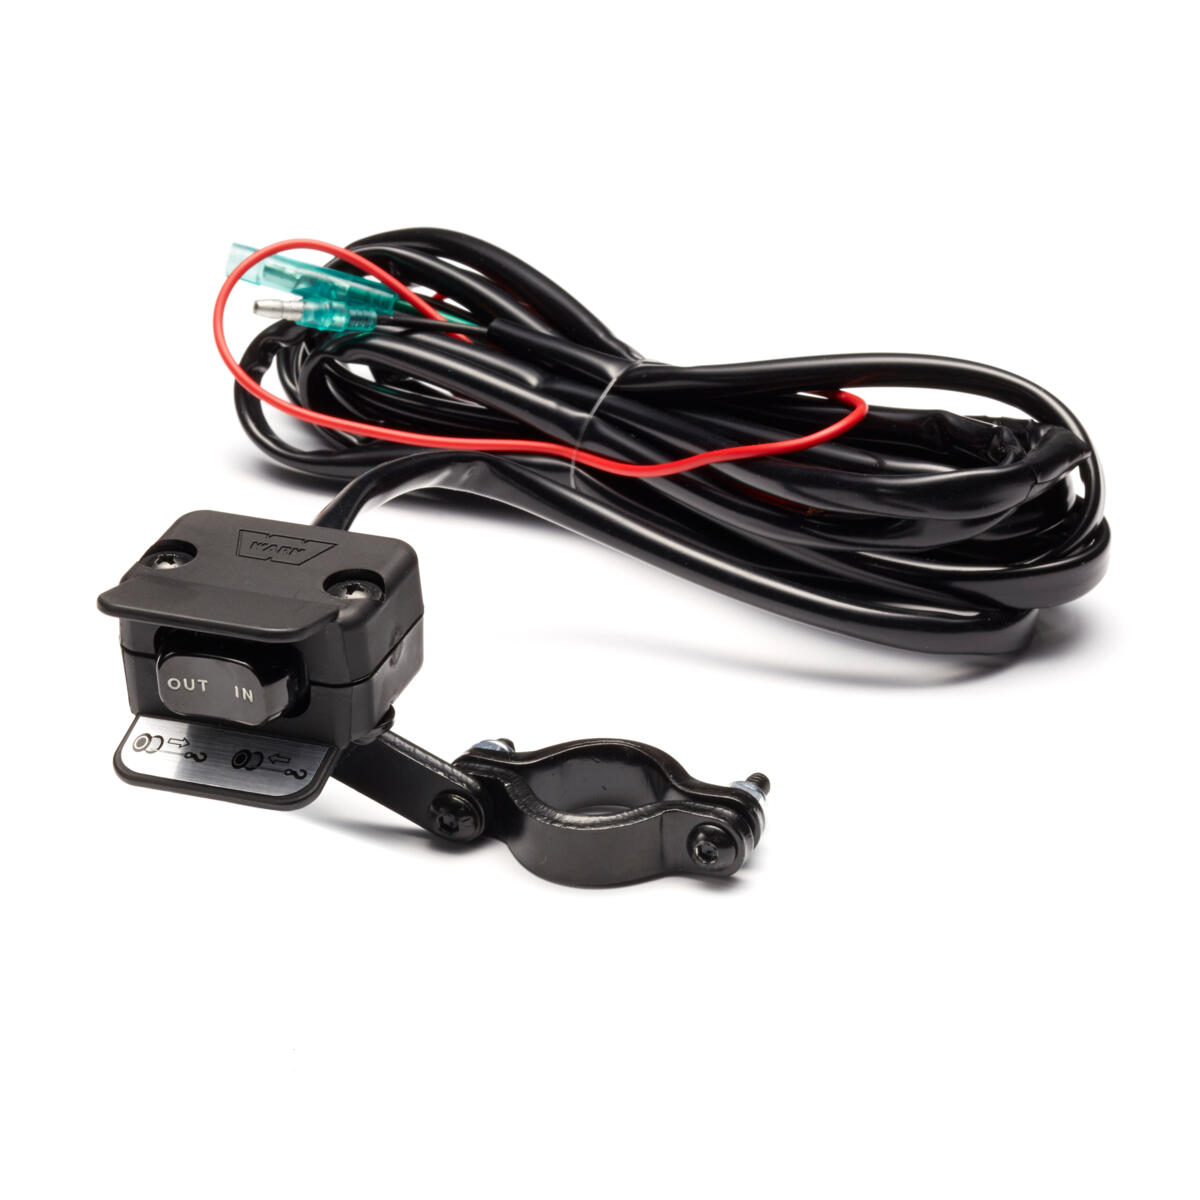 Replacement control switch for your optional WARN® winch.